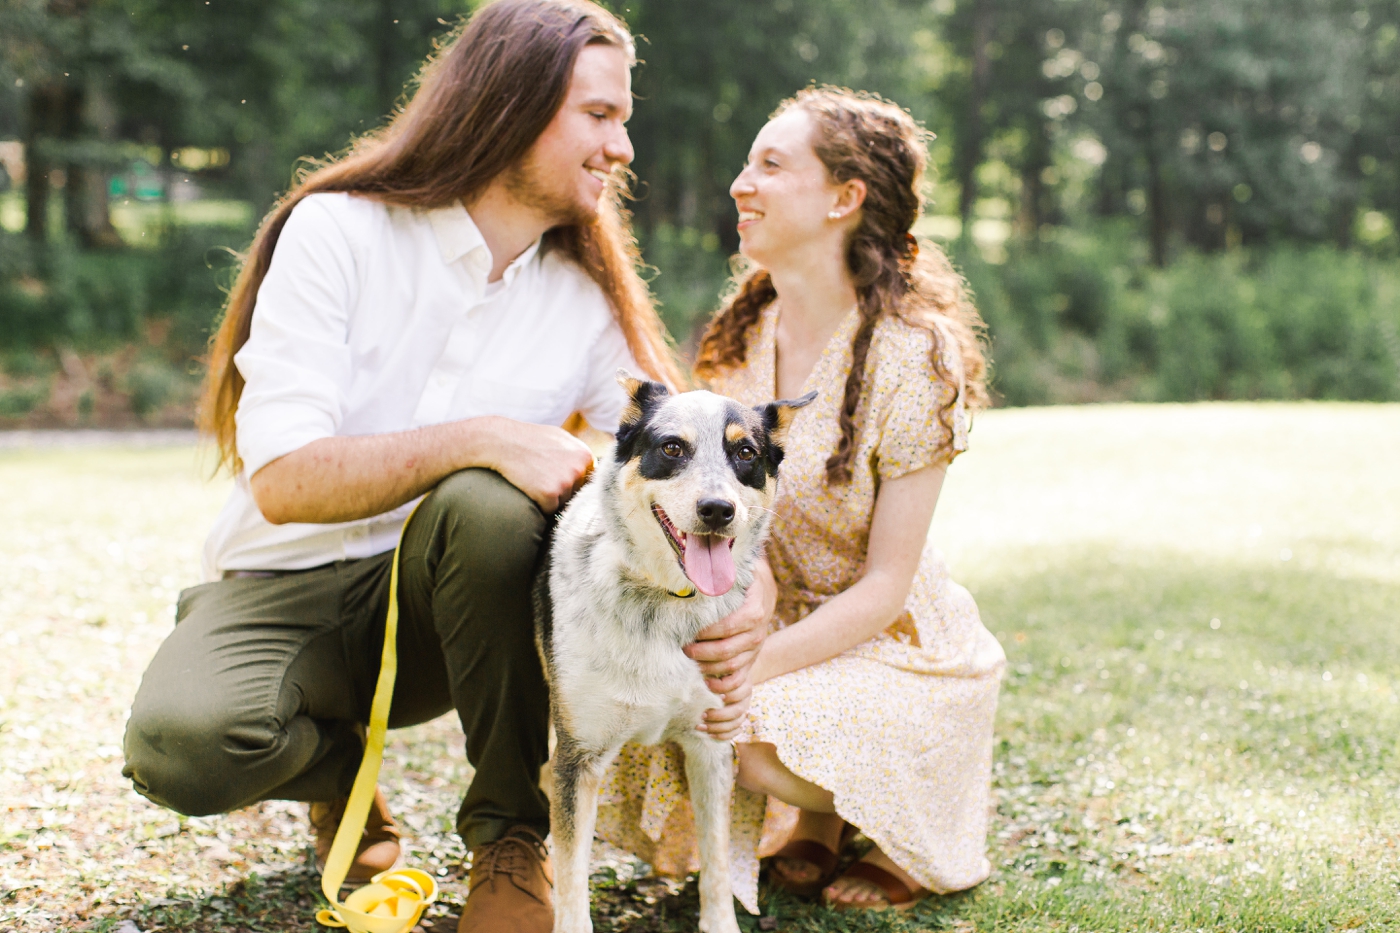 Engagement session with their dog